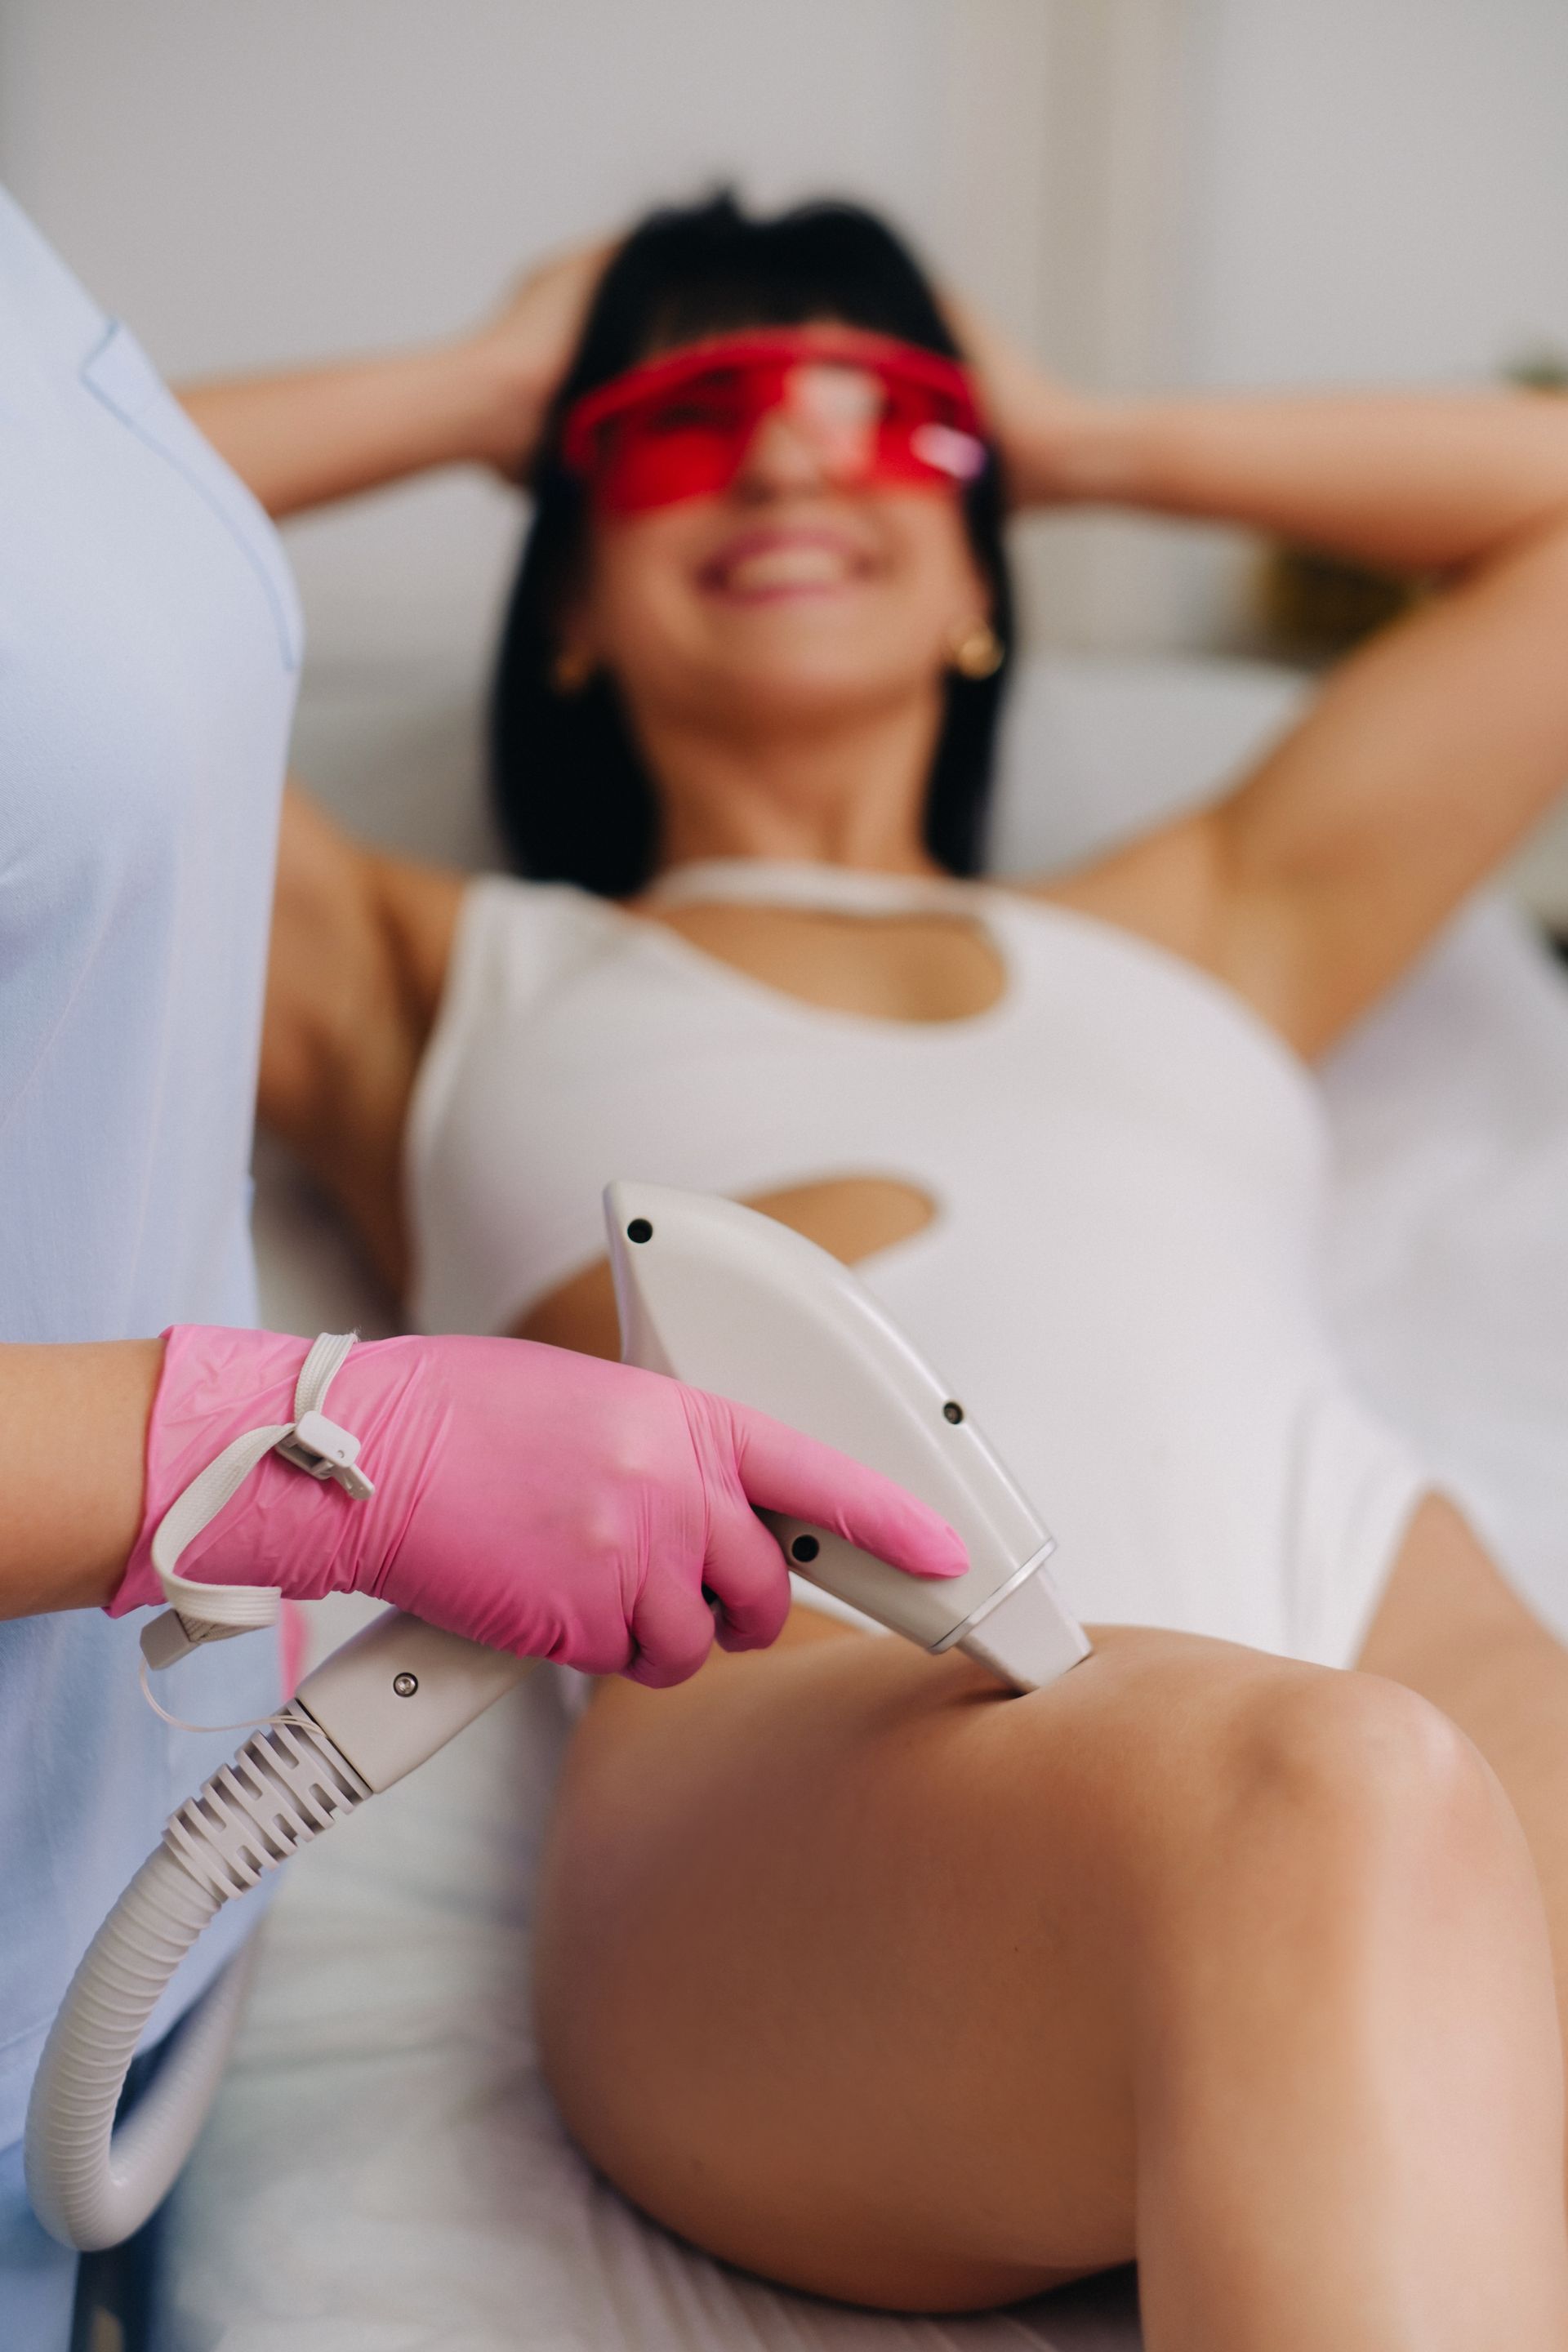 woman getting laser hair removal on legs